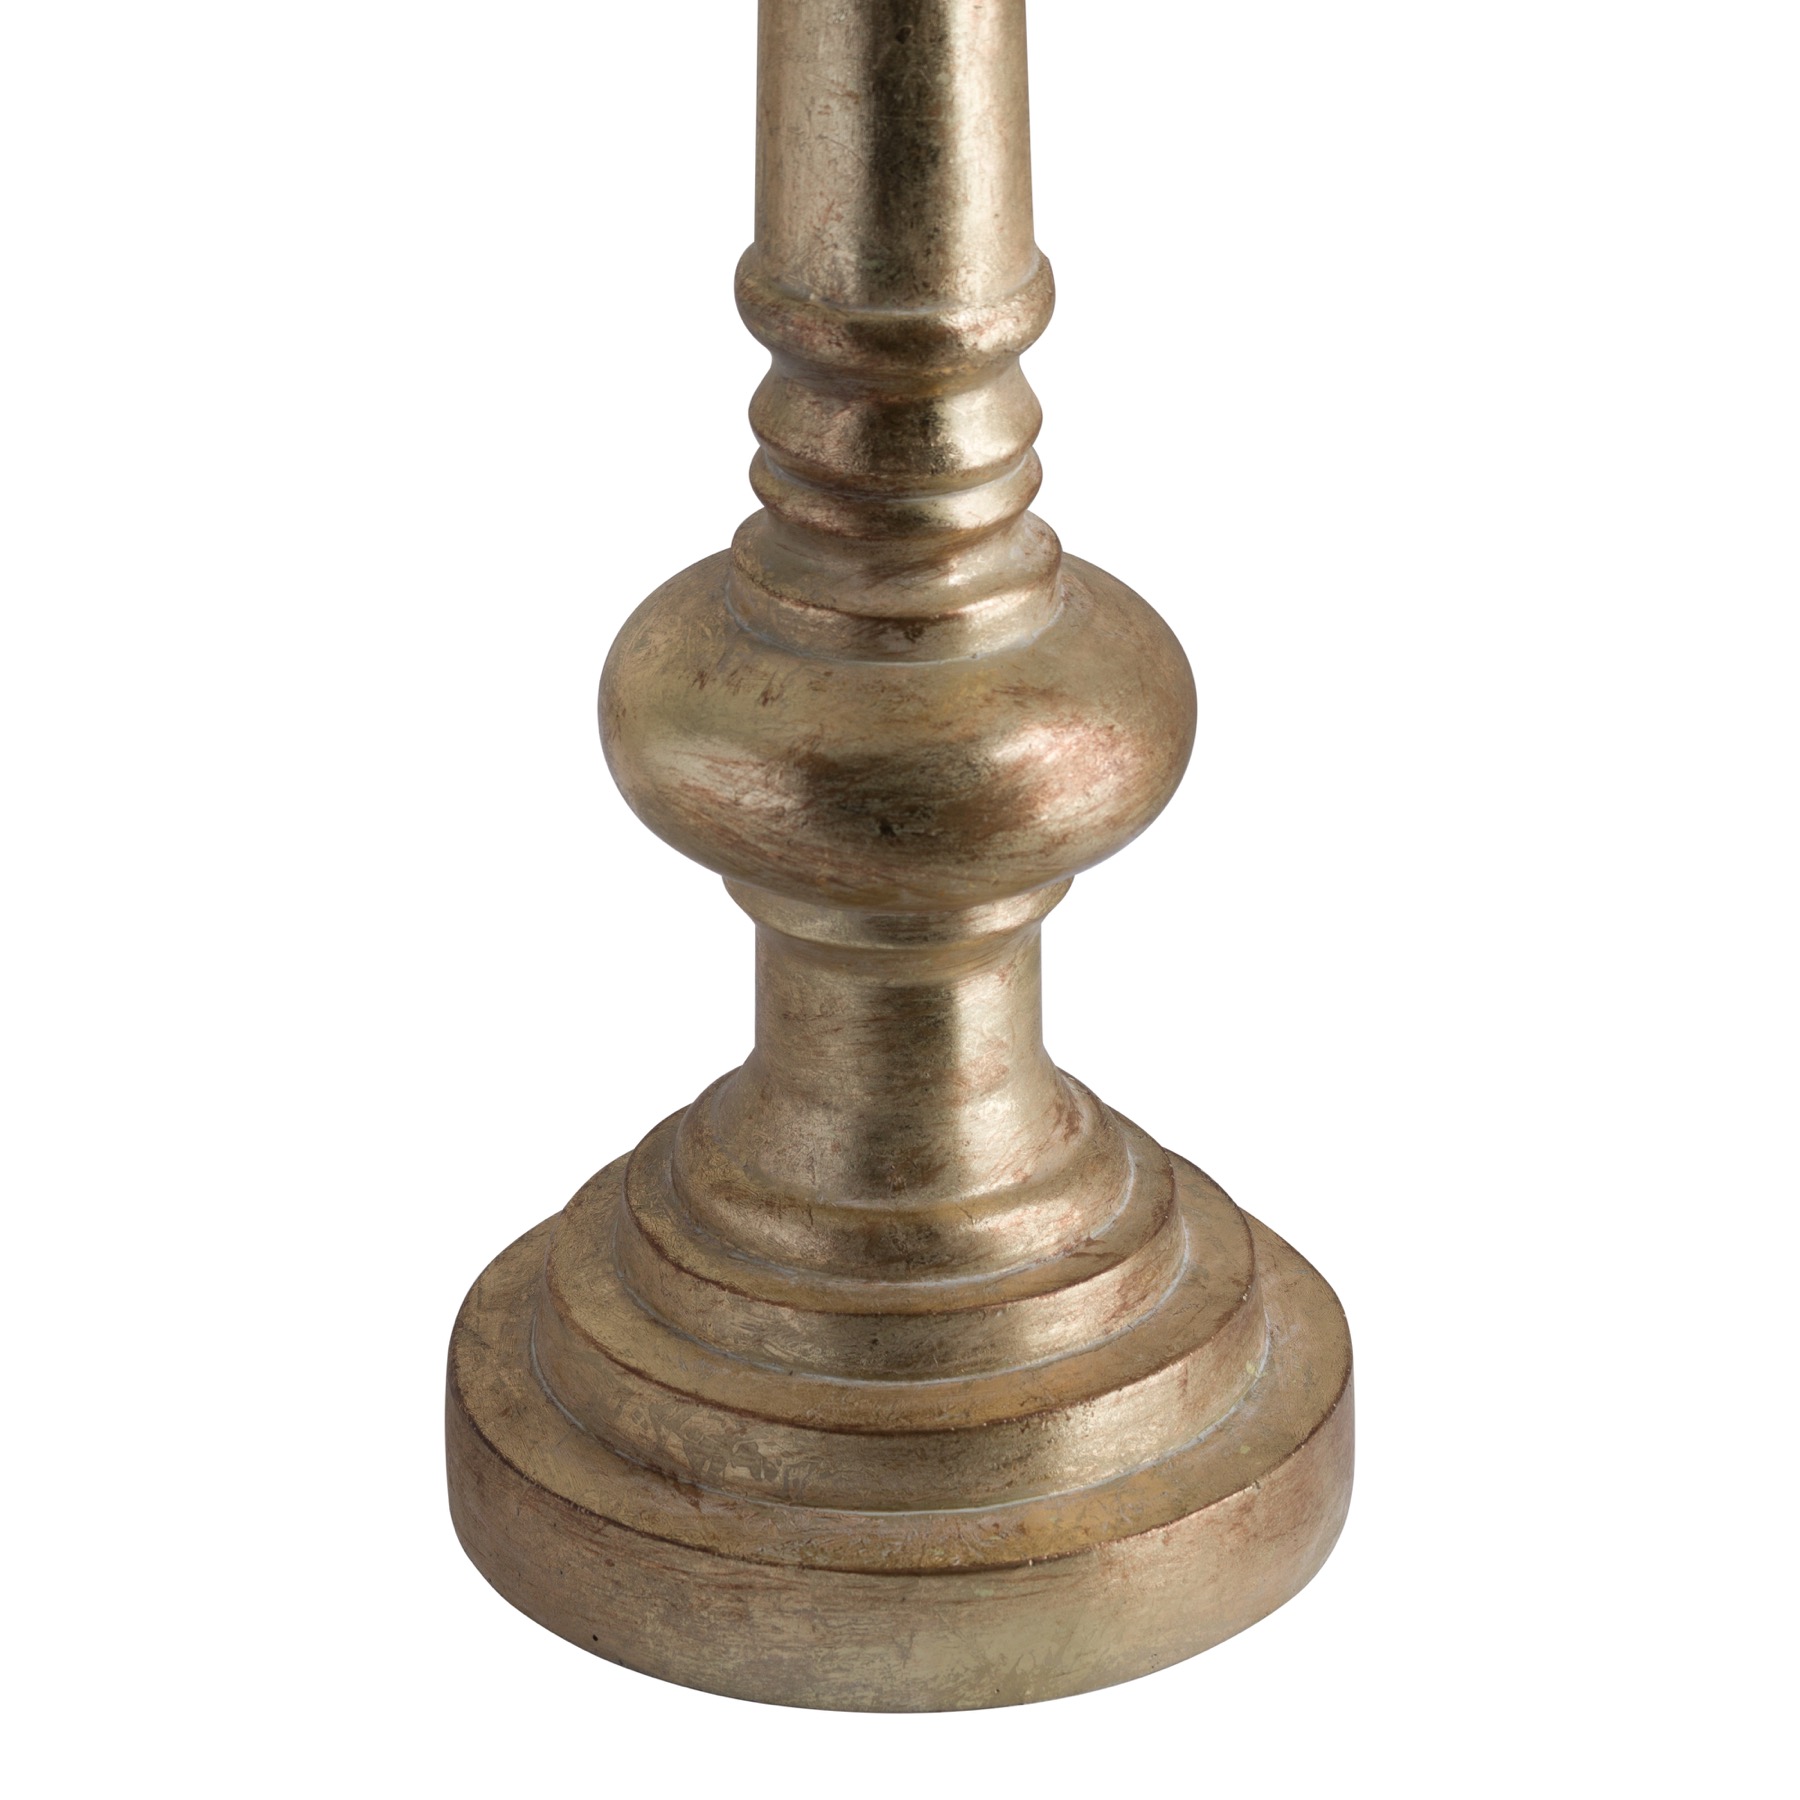 Antique Brass Effect Tall Candle Holder - Image 2